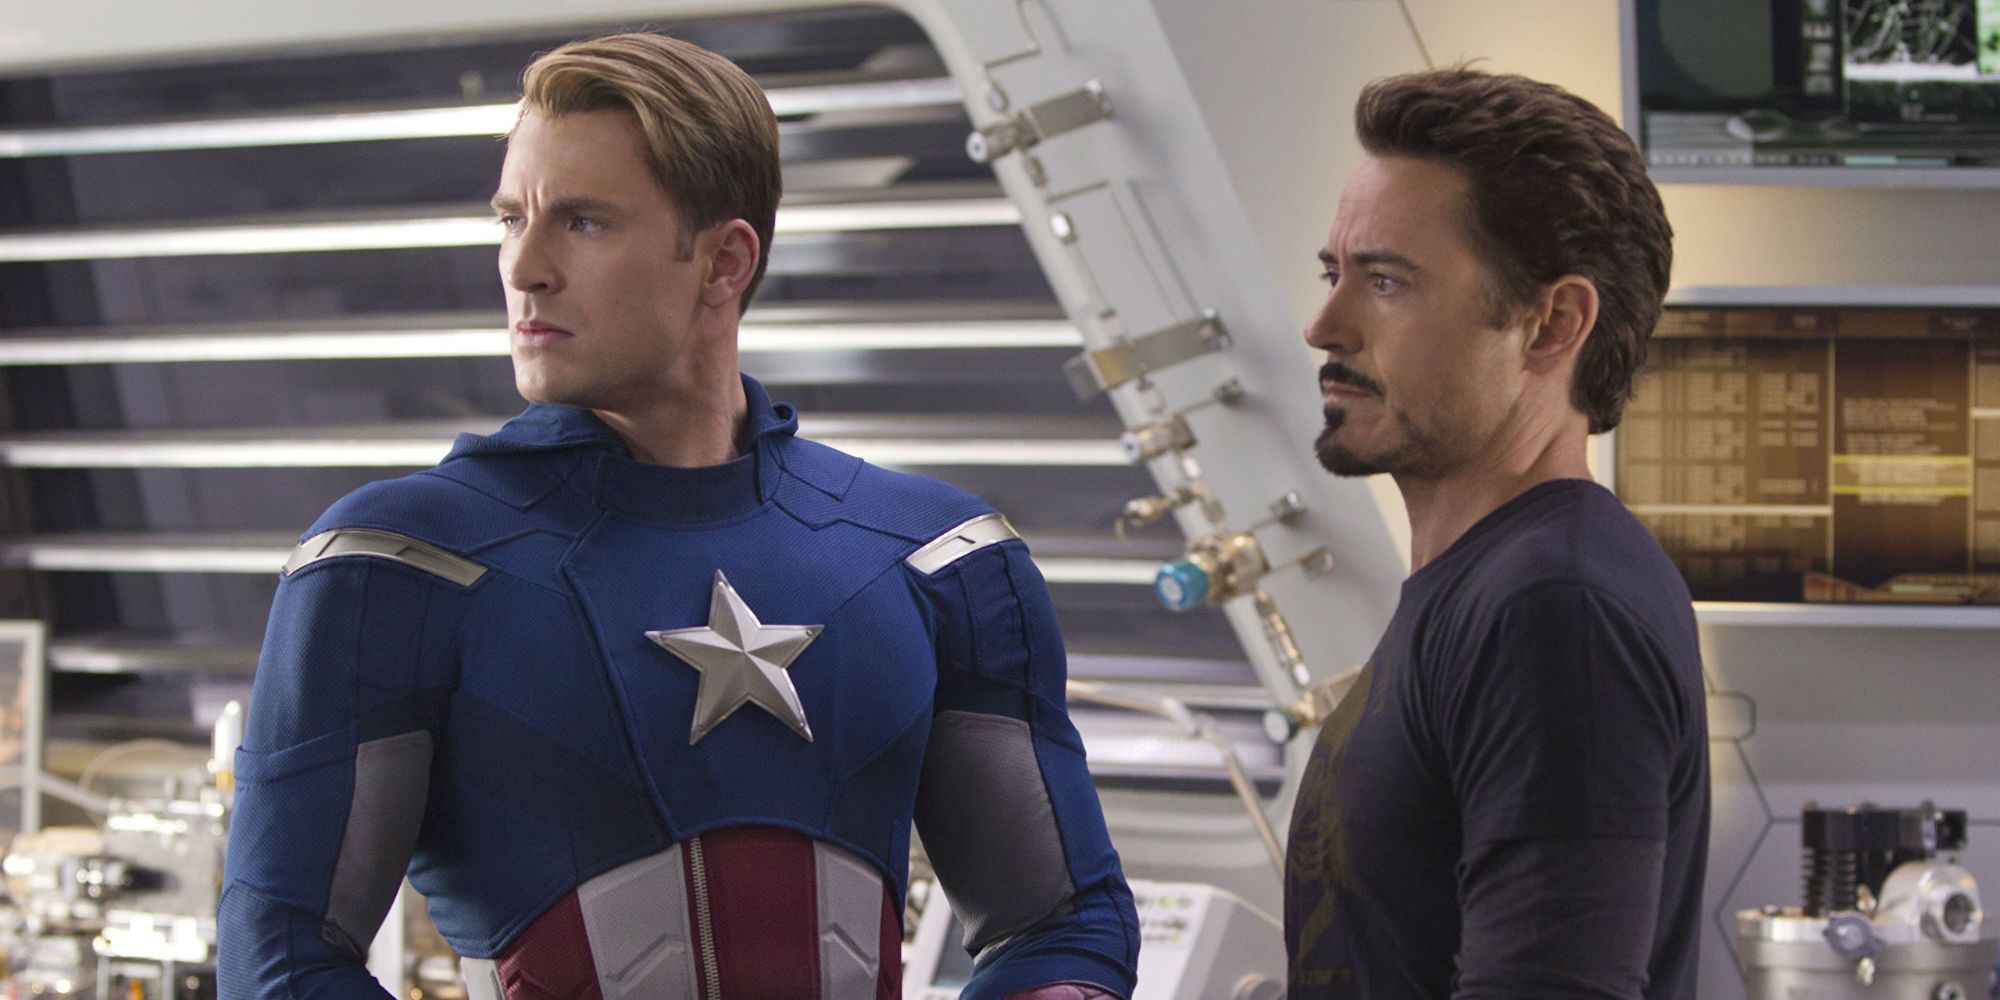 Captain America and Tony Stark argue in The Avengers 2012